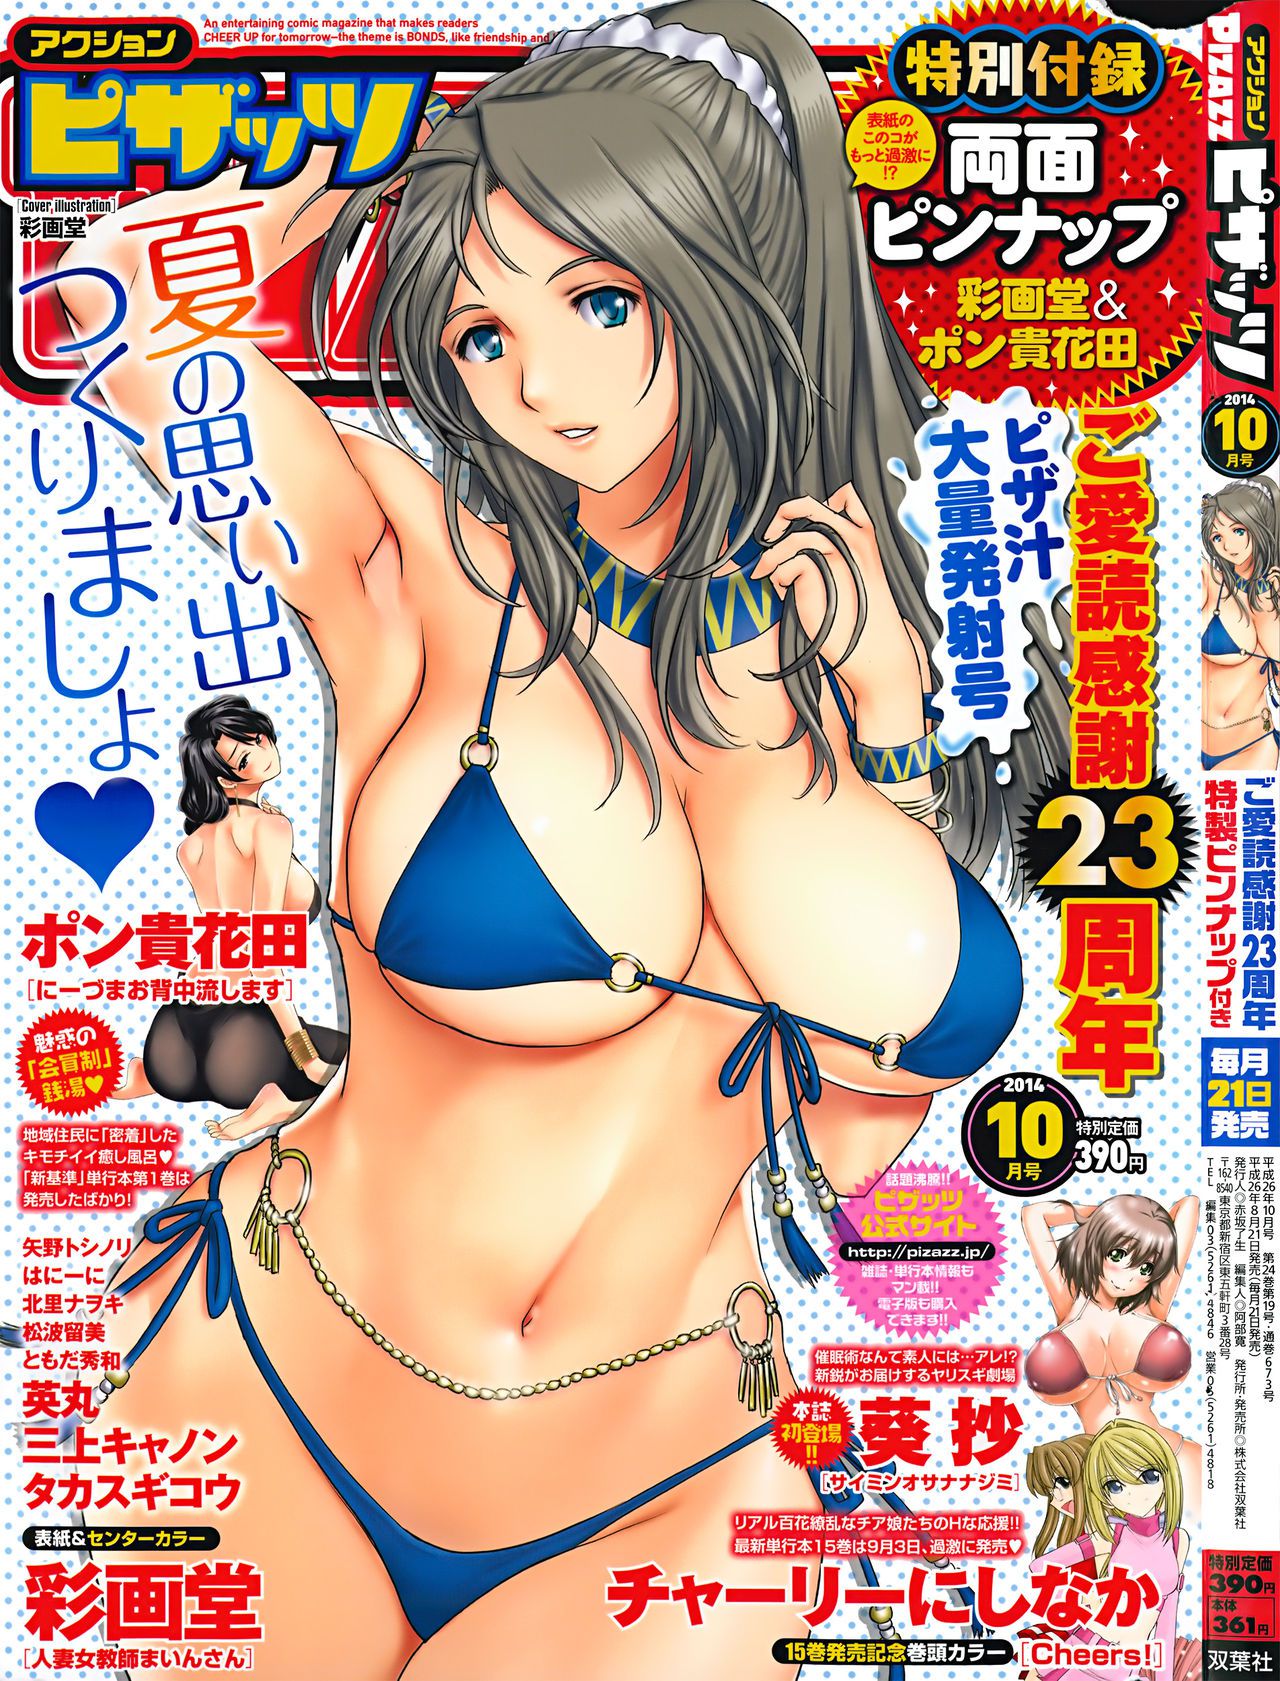 [Saigado] Cover Illustrations [彩画堂] Cover Illustrations 69